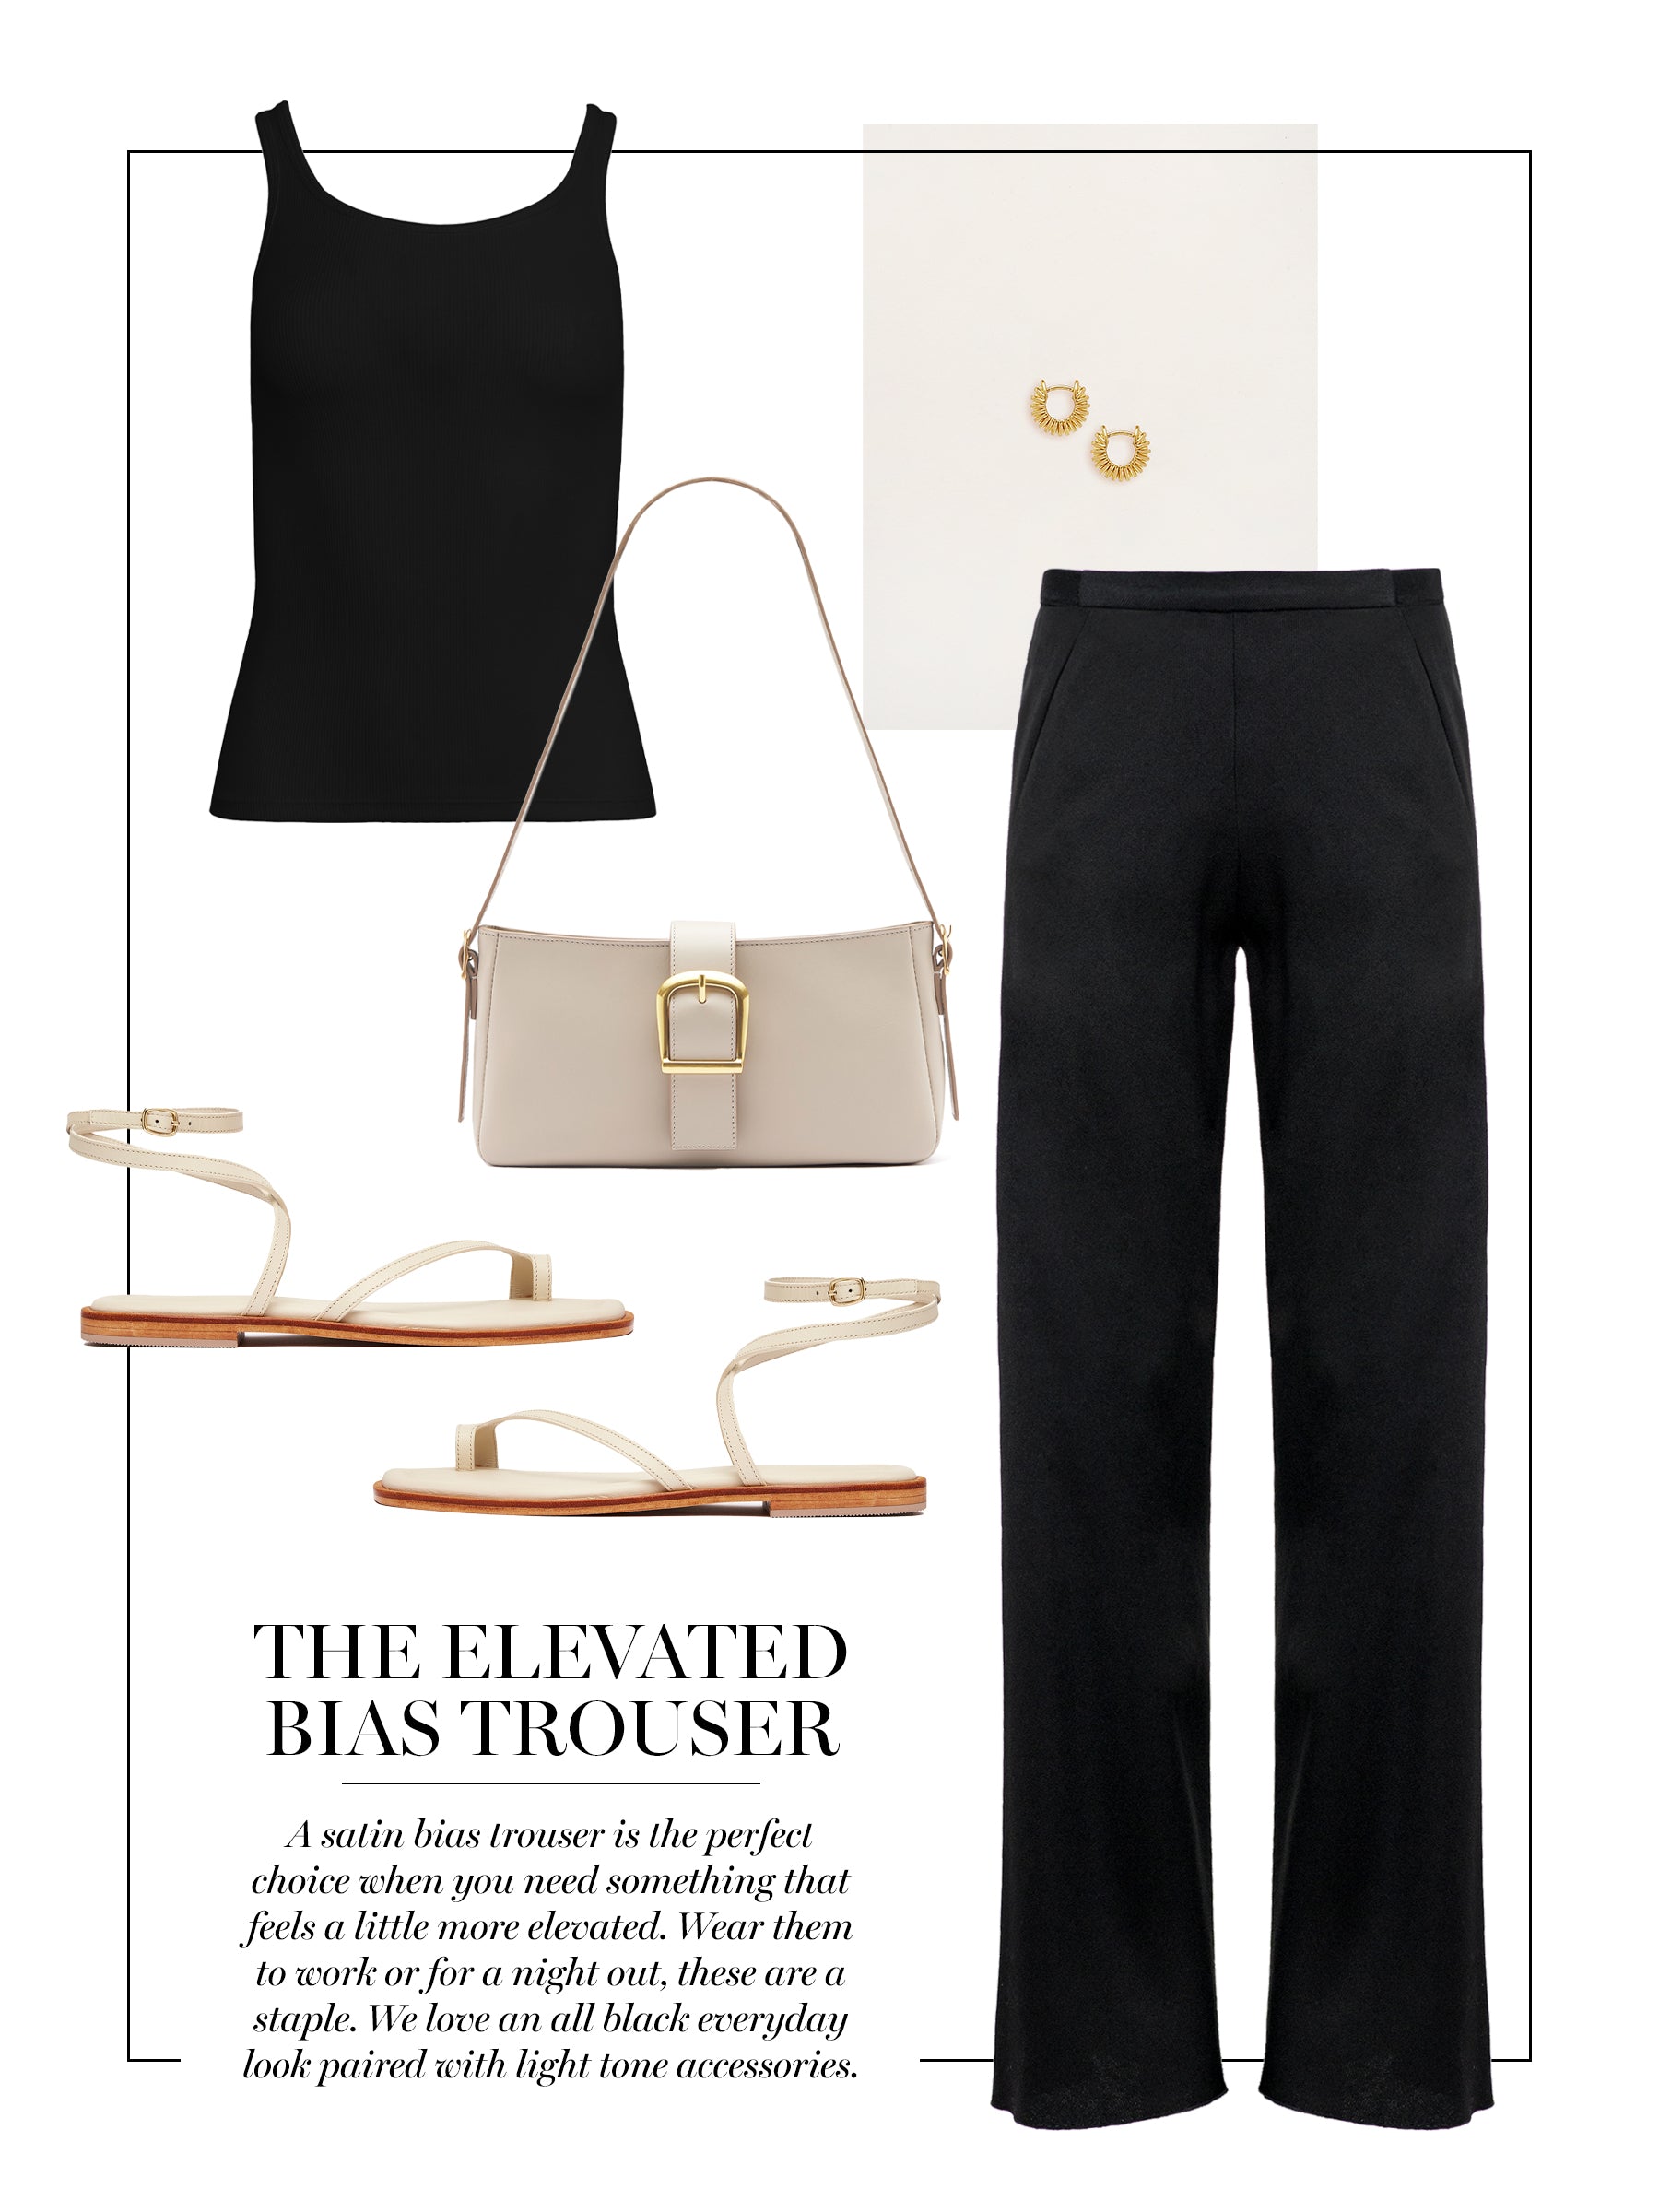 The Elevated Bias Trouser